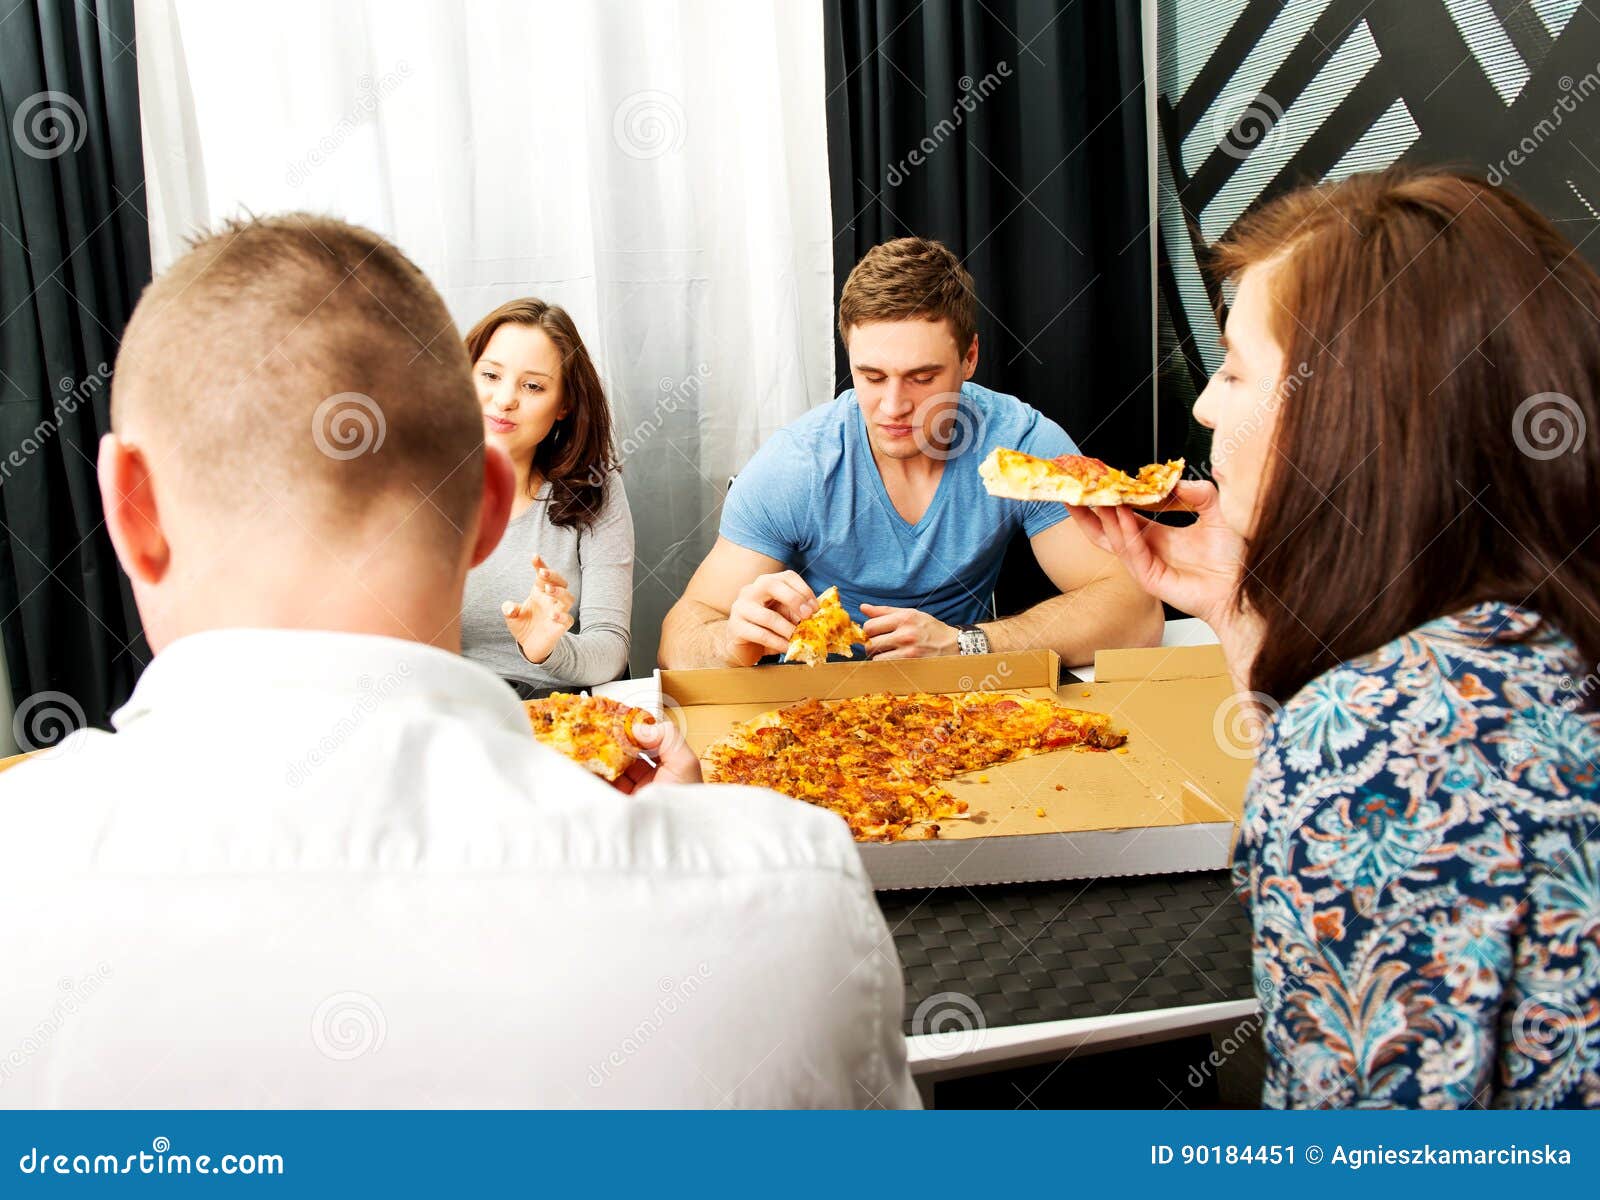 Dinner with friends. stock image. Image of friend, lifestyle - 90184451